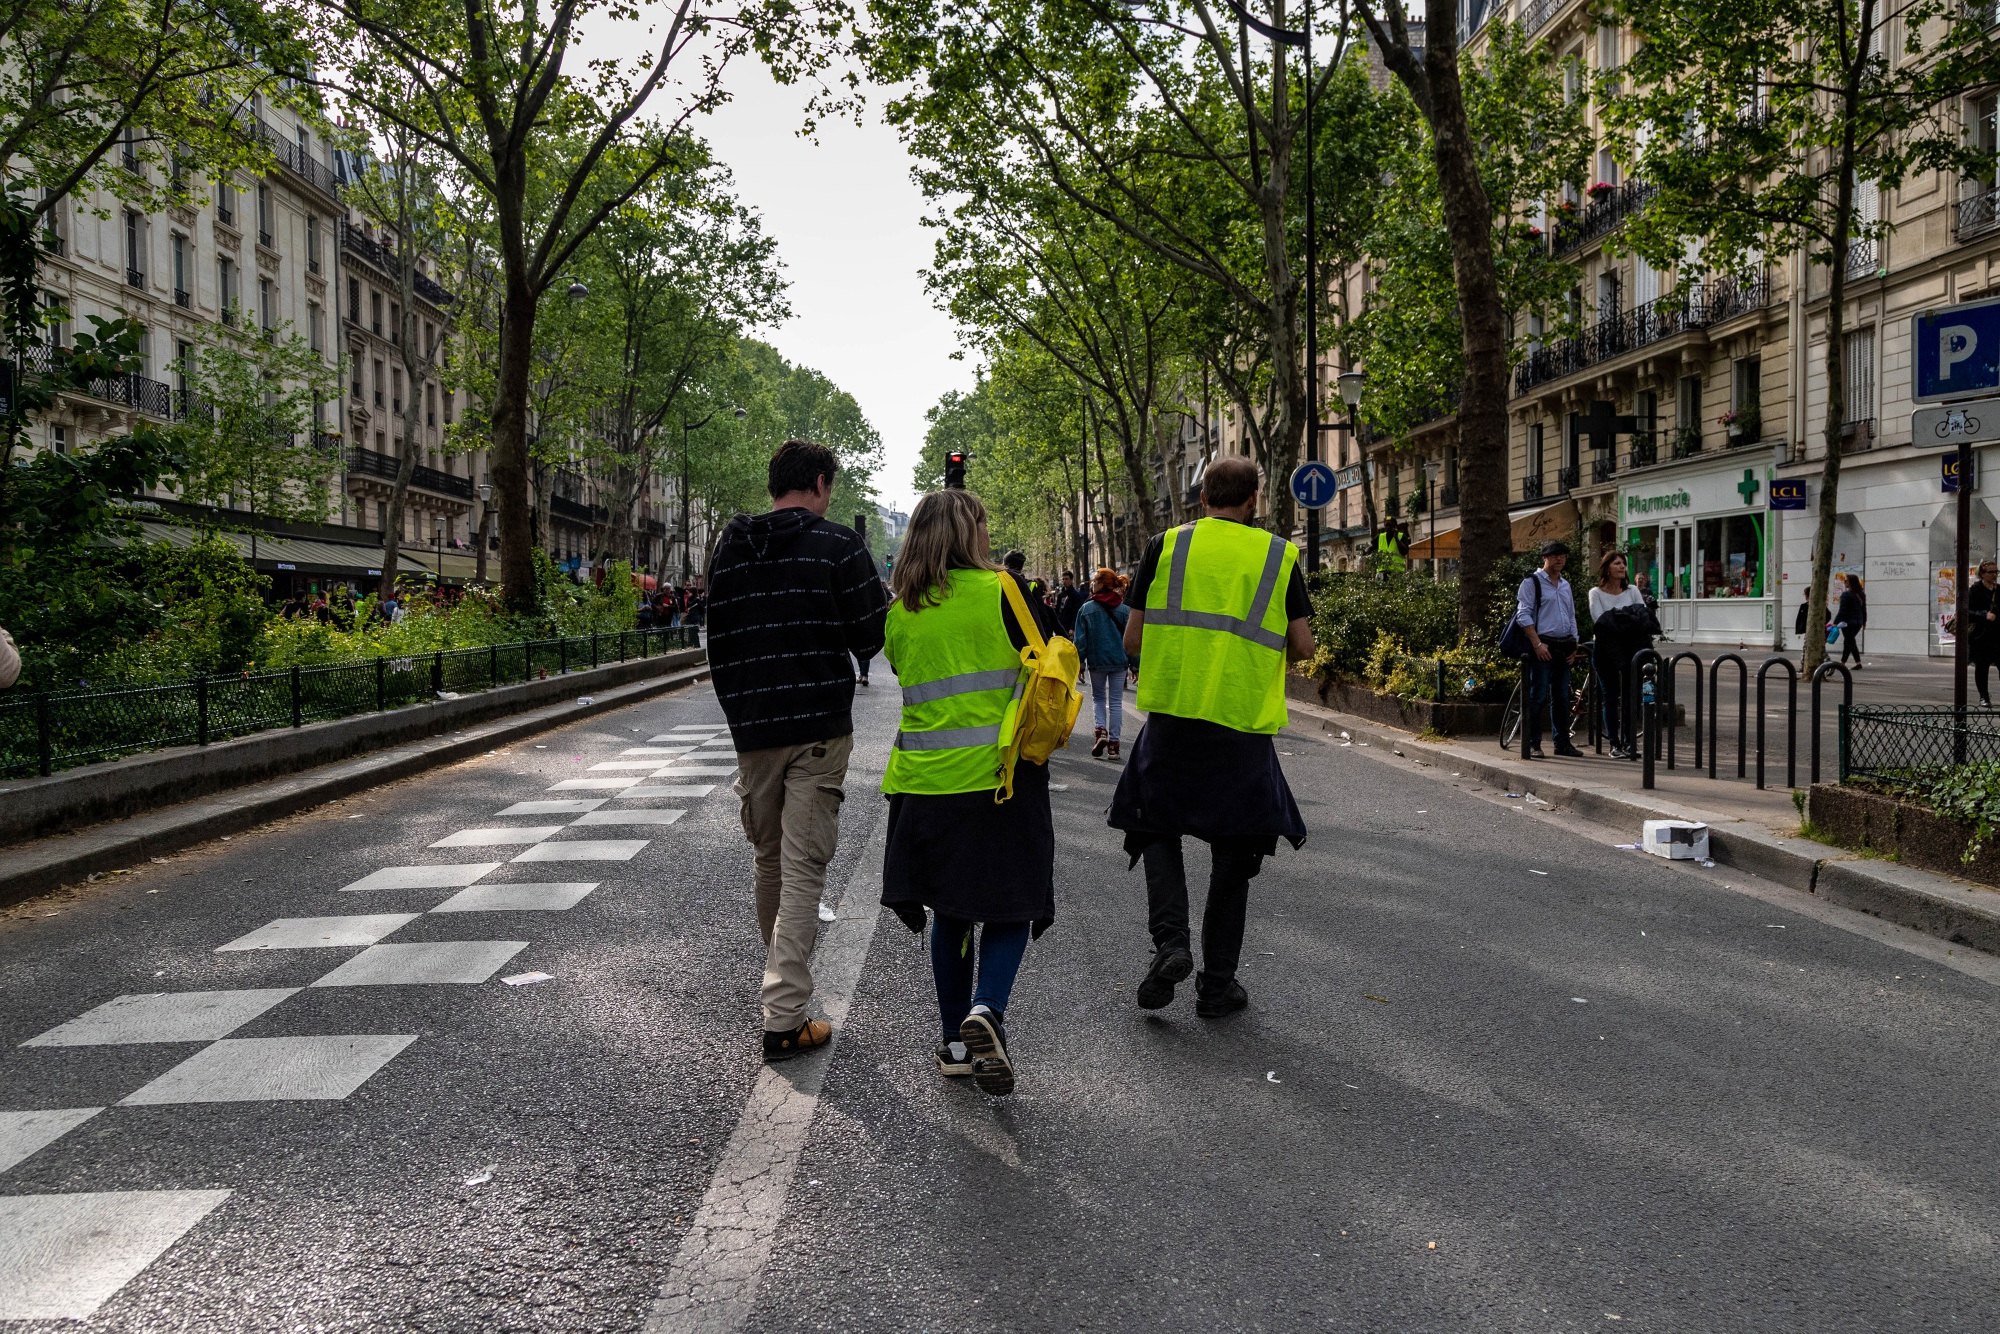 Yellow vest protesters walk along an avenue after protesting during International Workers' Day in Paris, France, on Wednesday, May 1, 2019. French President Emmanuel Macron has called for an extremely firm response to violent protesters at Wednesday's traditional May 1 holiday demonstrations.